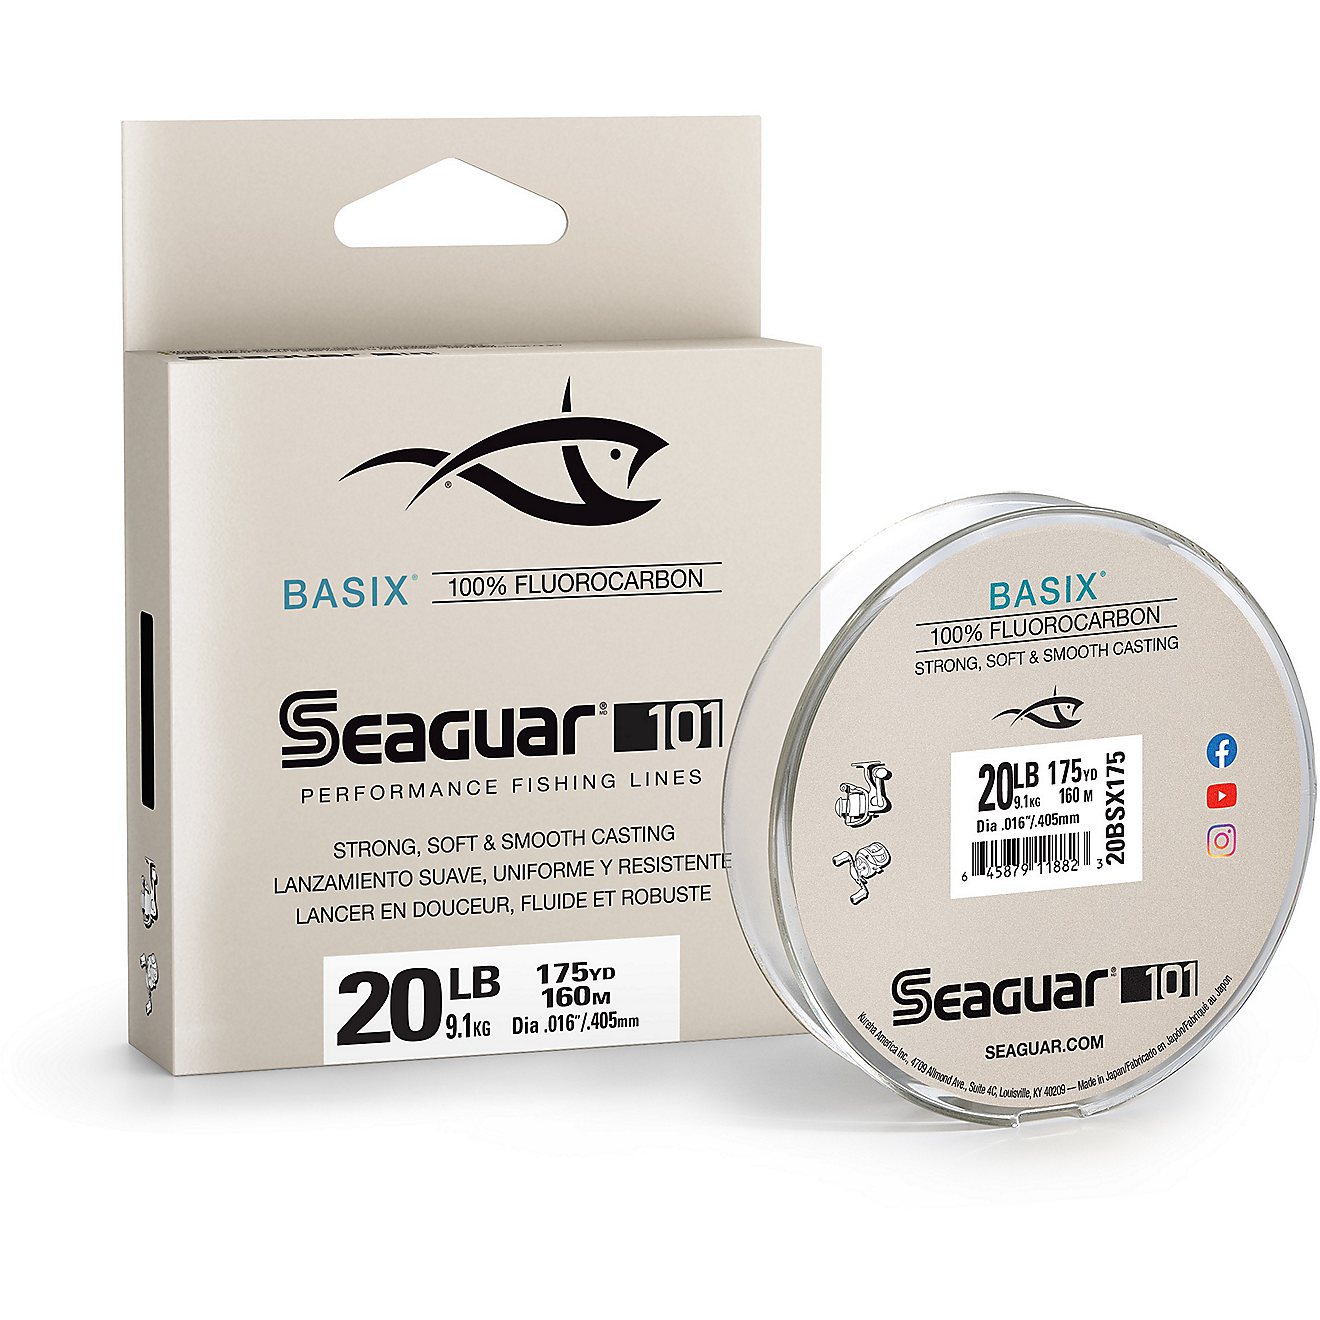 Seaguar 101 Basix 175 yd Fluorocarbon Fishing Line                                                                               - view number 1